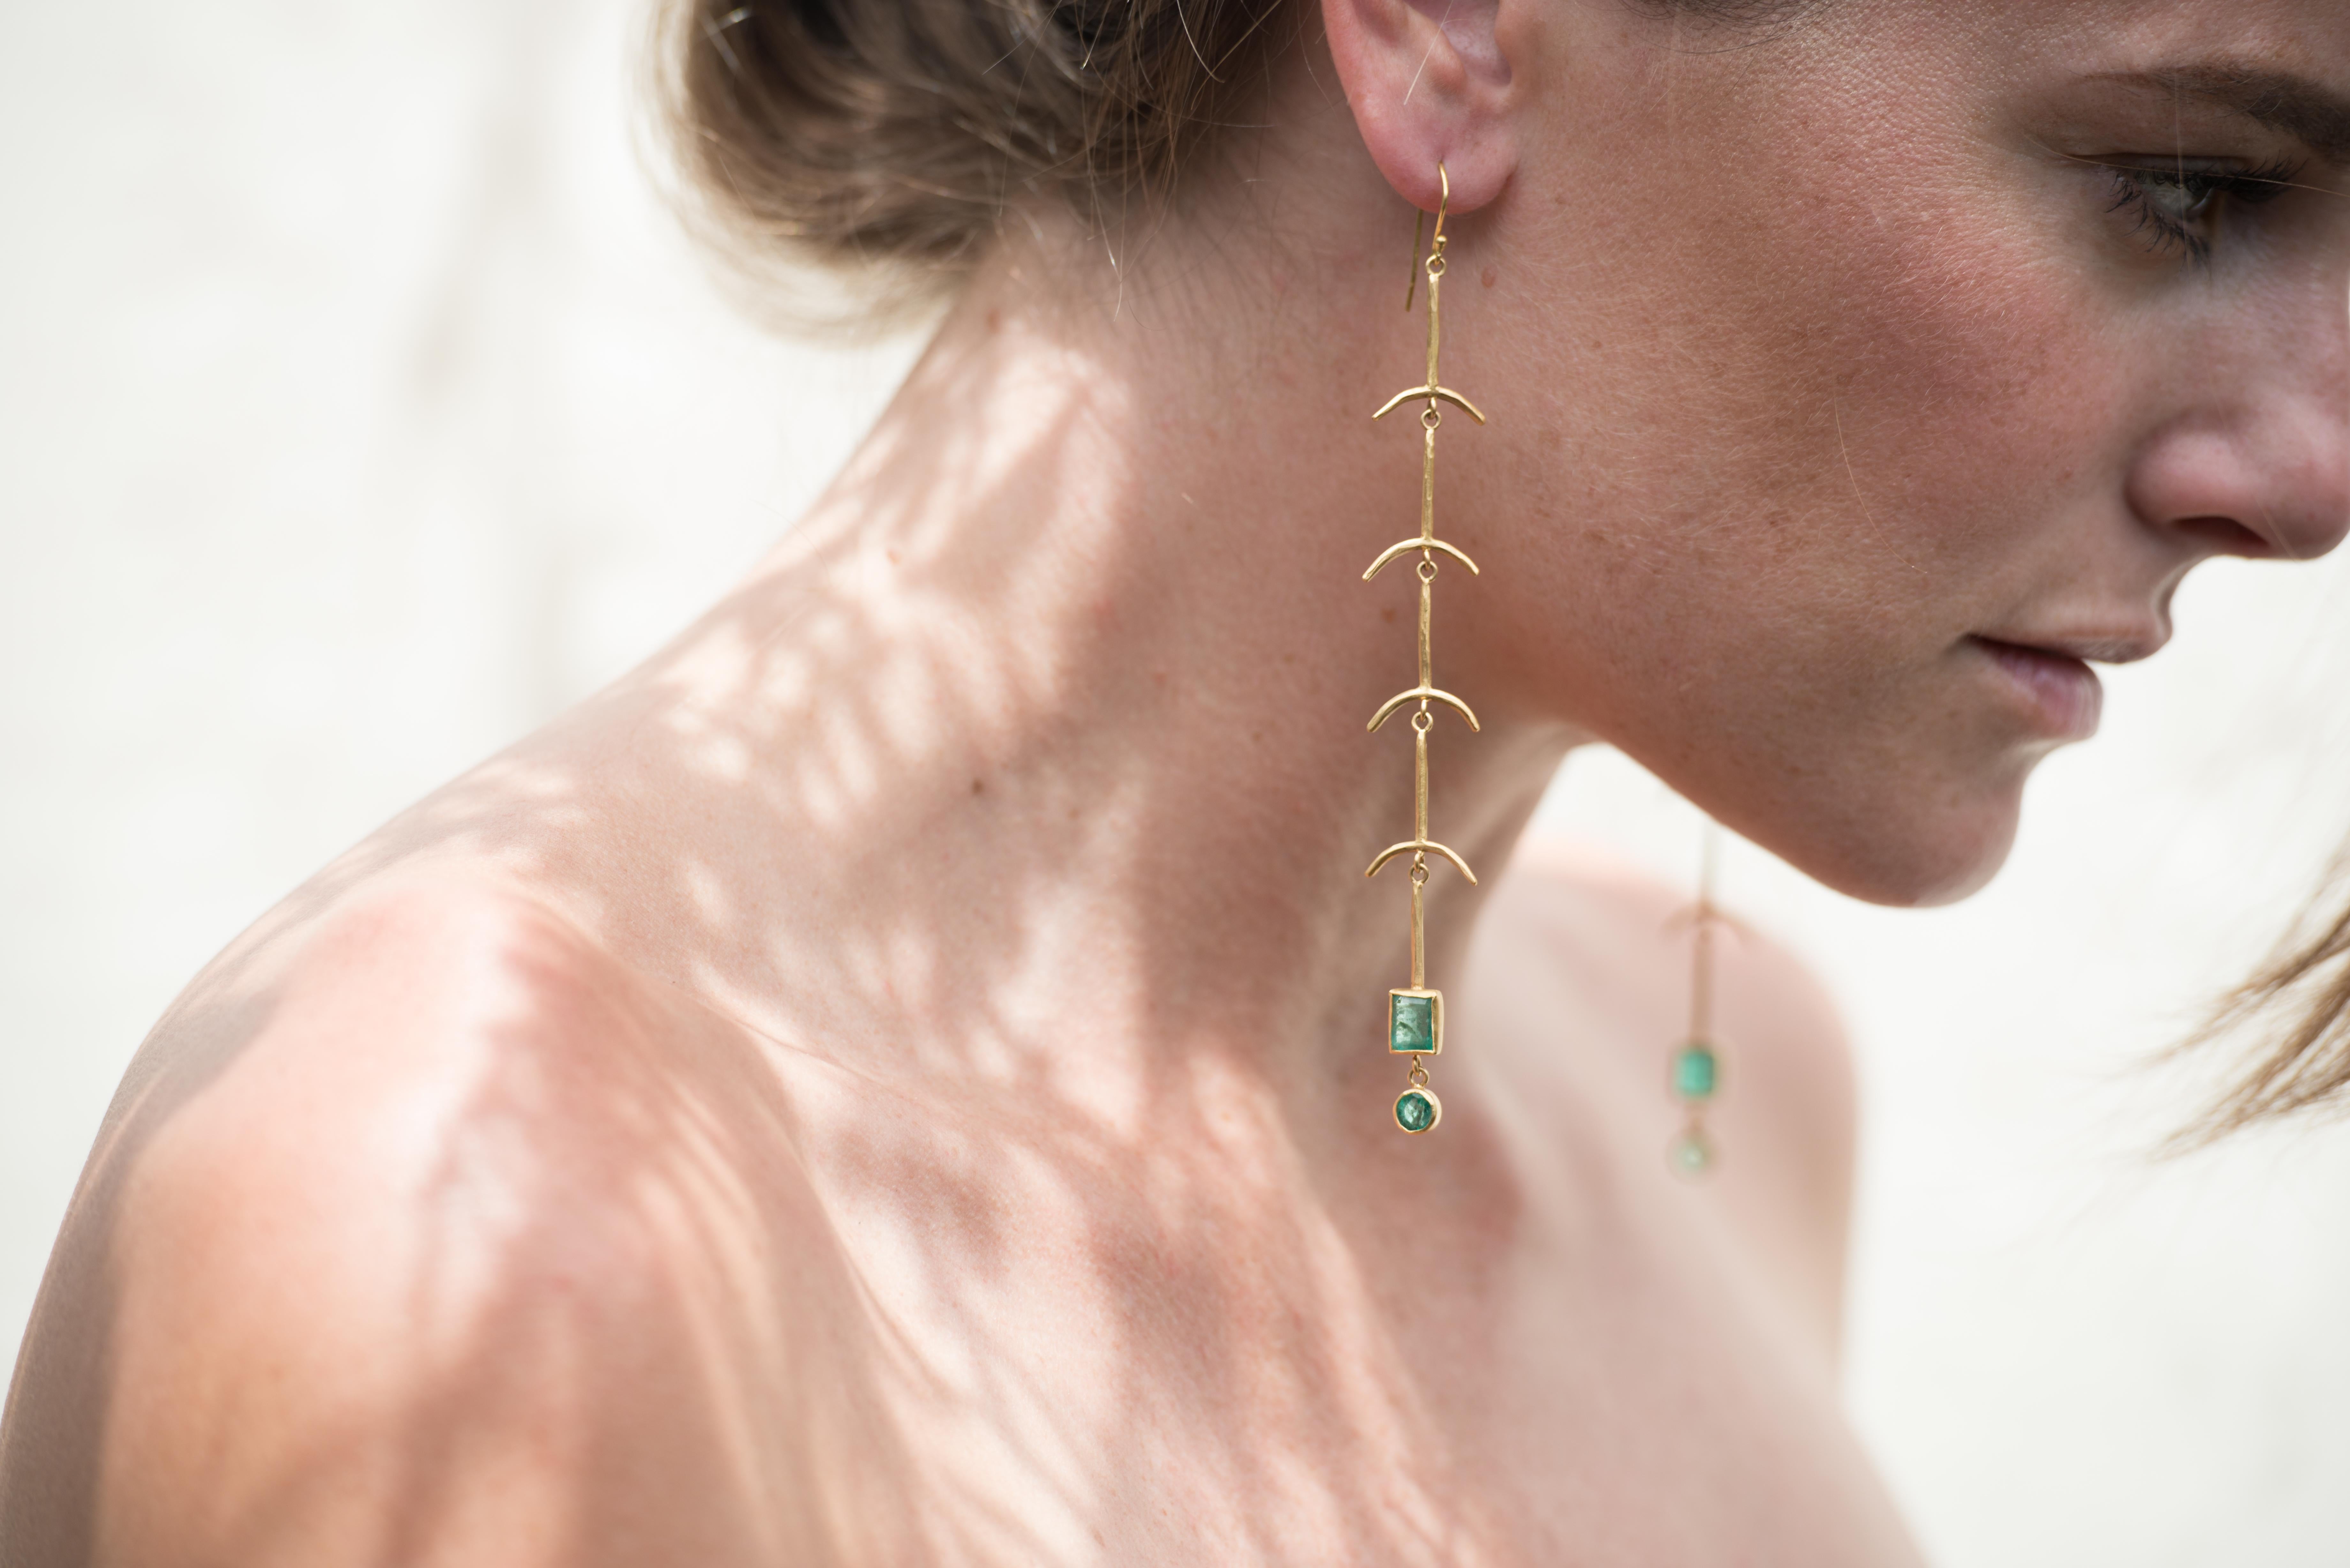 Completely handcrafted, our long shoulder dusters featuring Gemfields' ethically sourced Zambian emeralds bezel set in matte 18k recycled gold are from our Bones Collection. Each section is hand forged to create a feel of ancient jewels unearthed